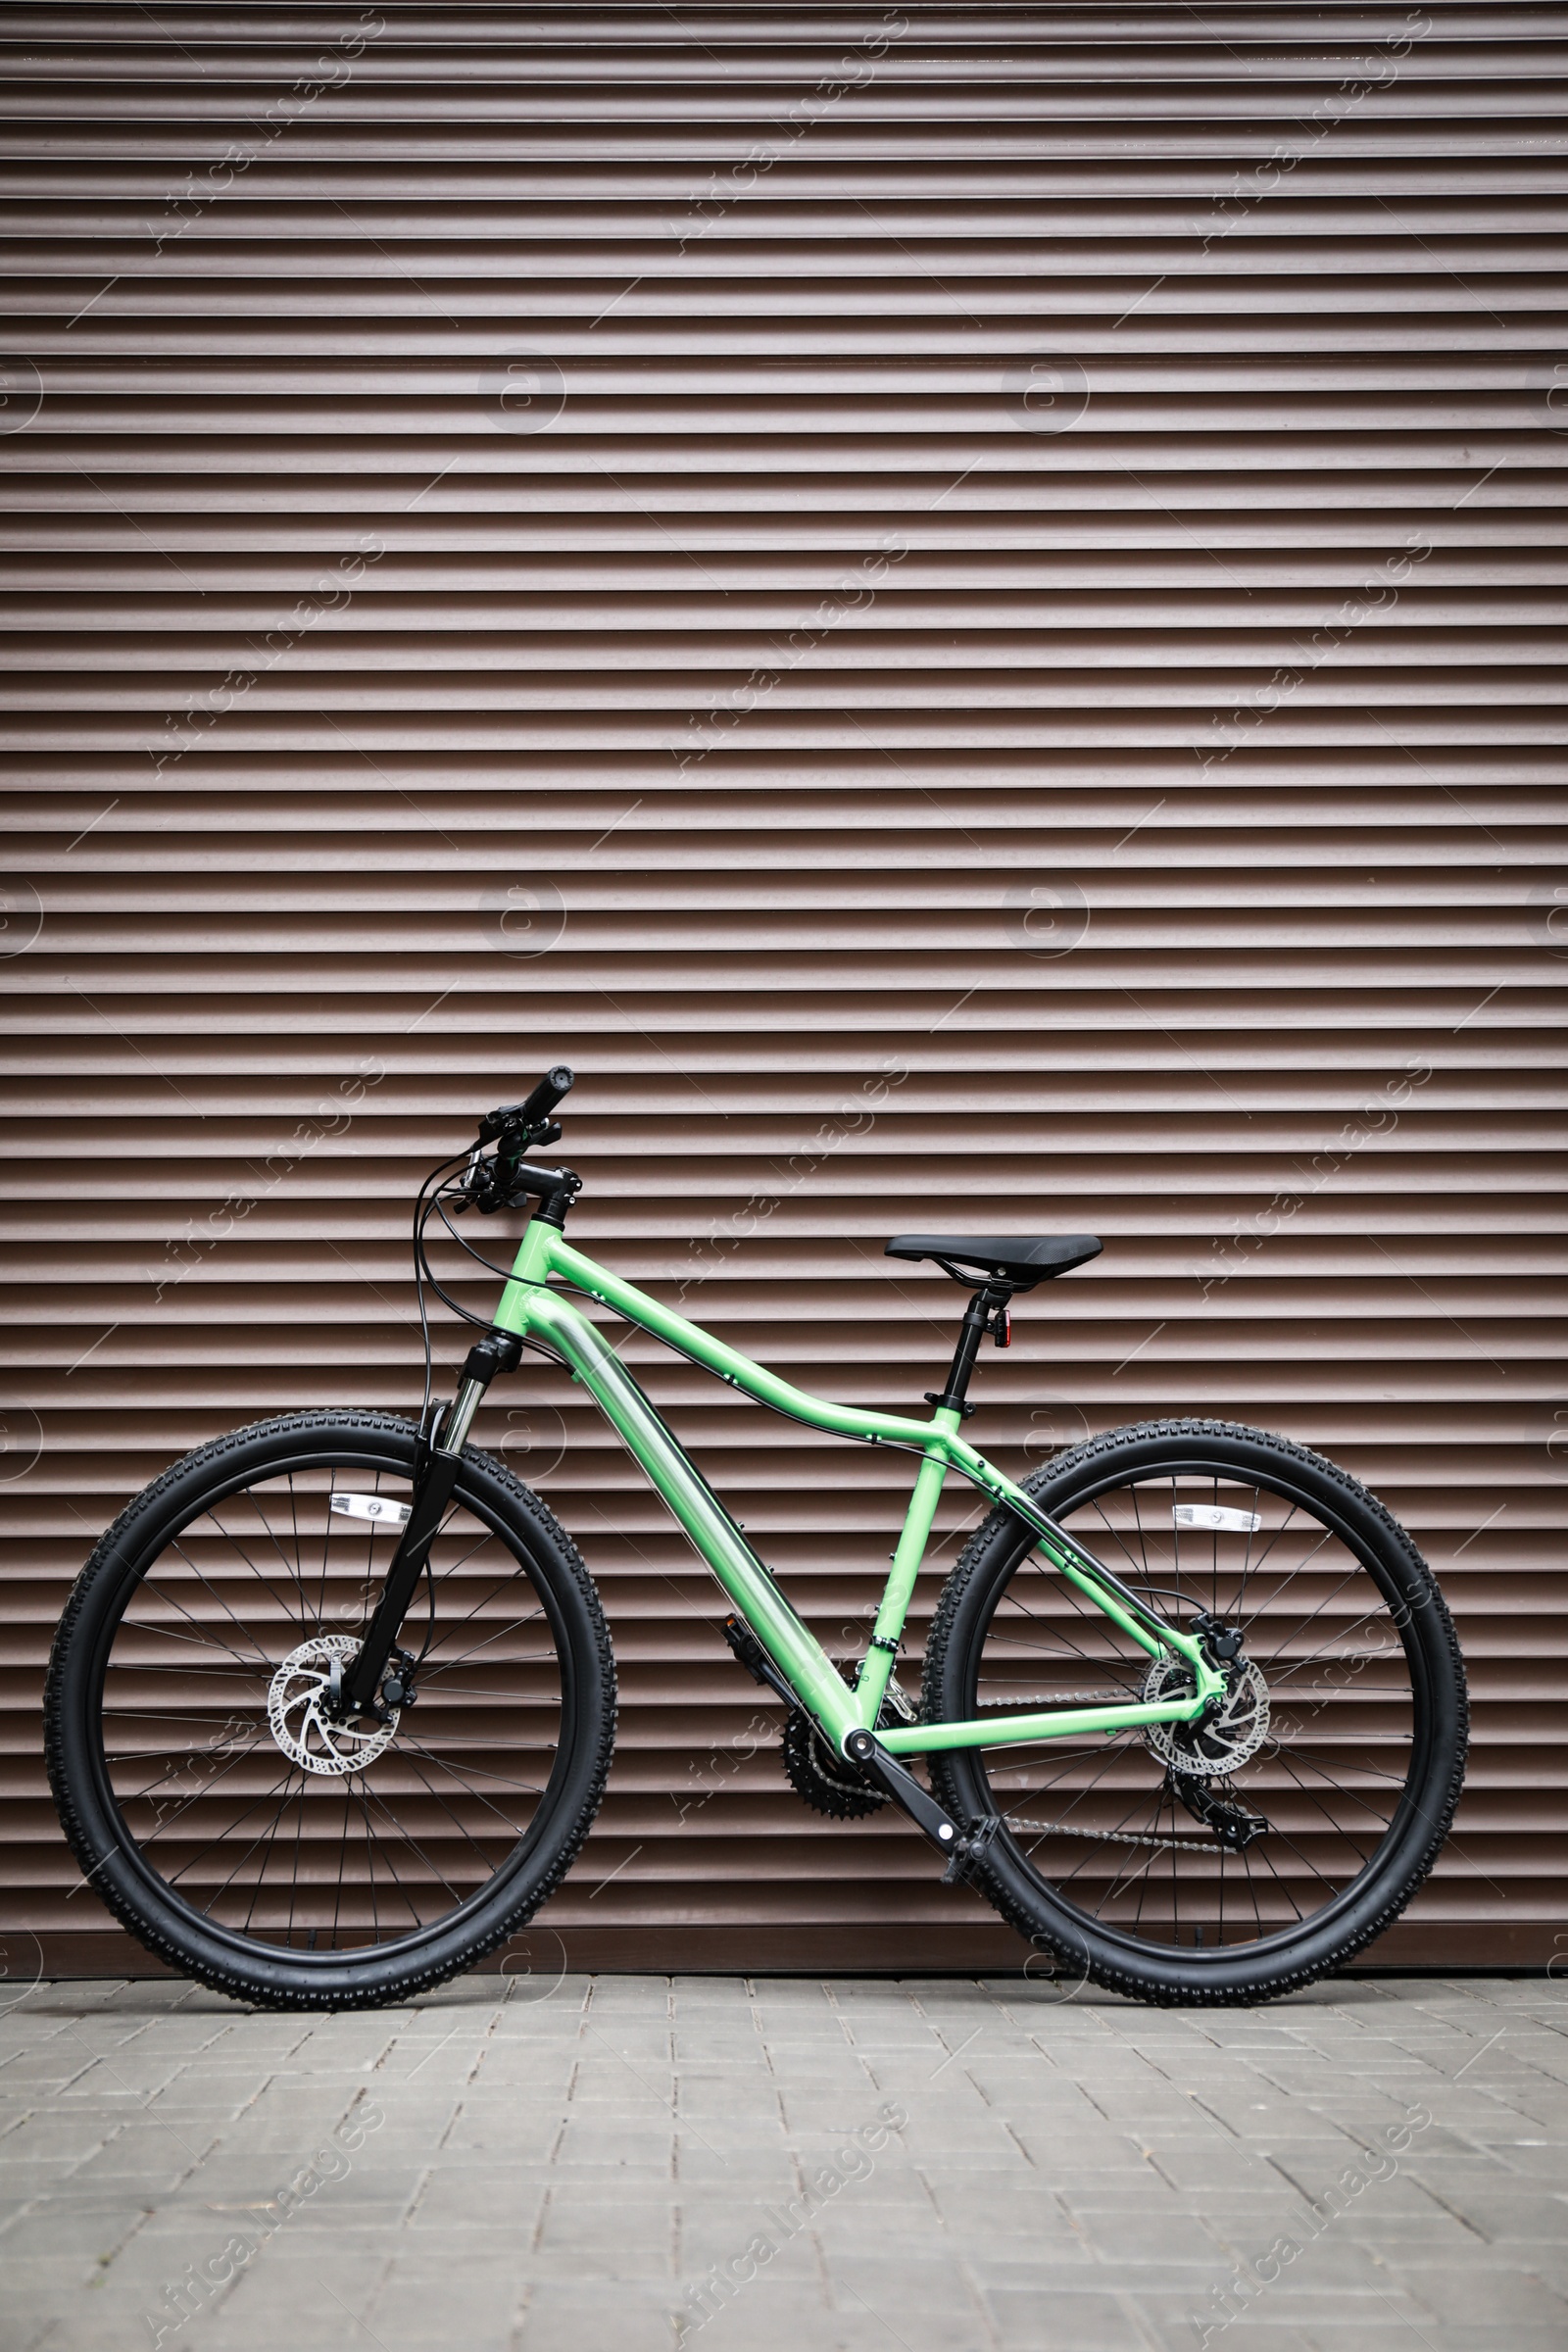 Photo of New modern color bicycle near brown wall outdoors